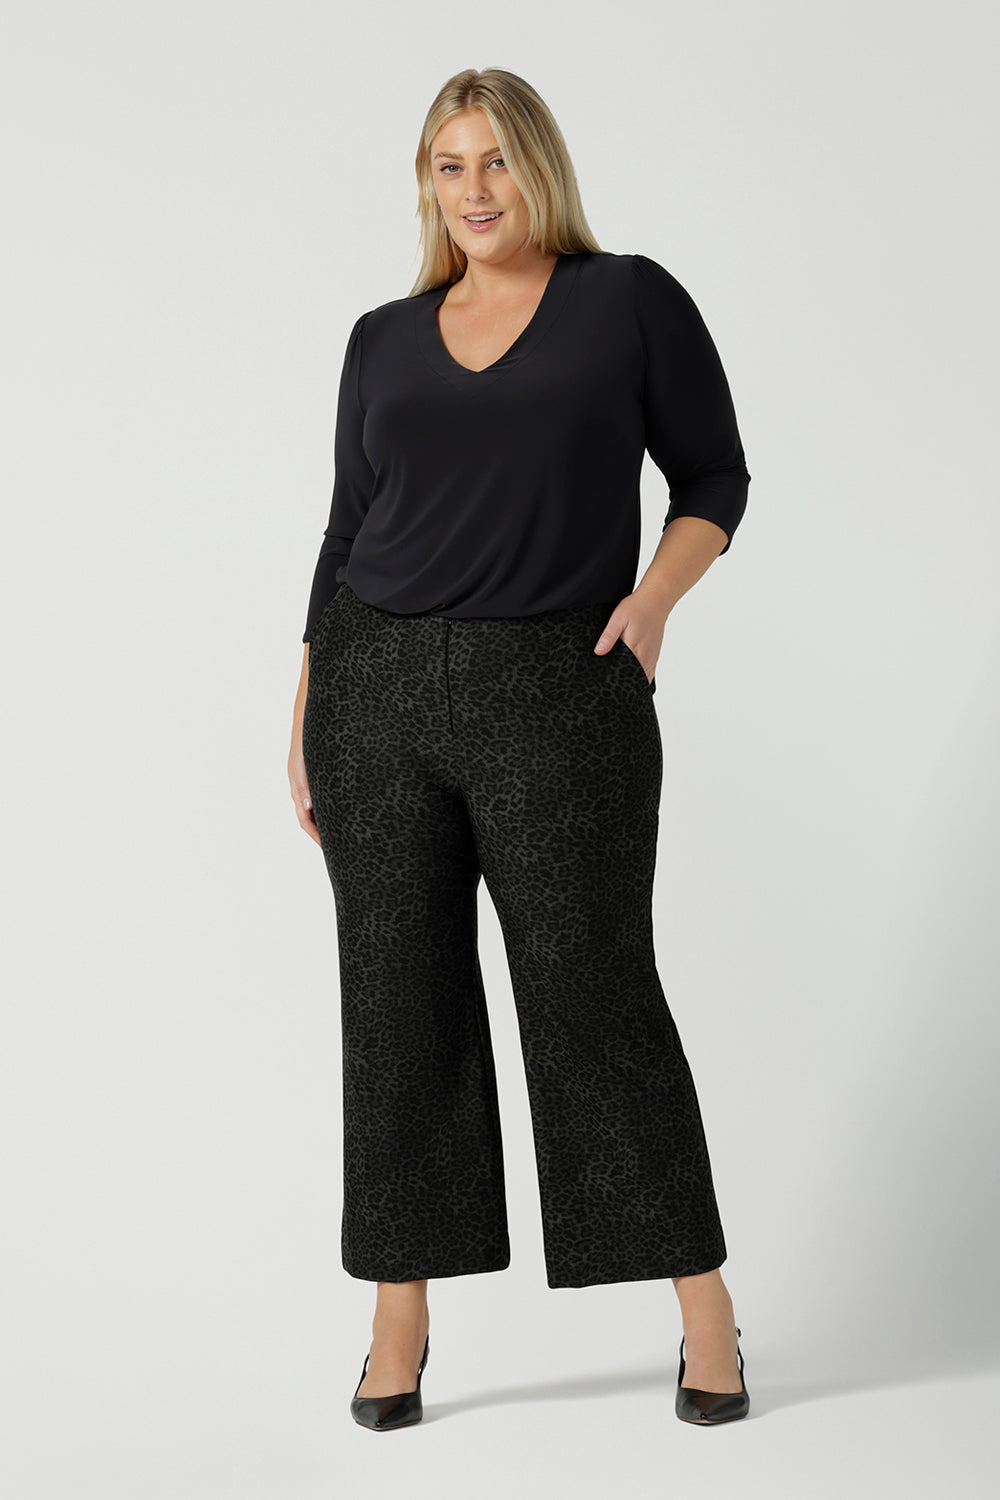 A size 18 woman wears Grey Leopard printed Ponte Troy Pants. A kick flare pant in a fashionable on trend leopard print paired back with a Vida top in Charcoal. Made in Australia for women size 8 - 24.